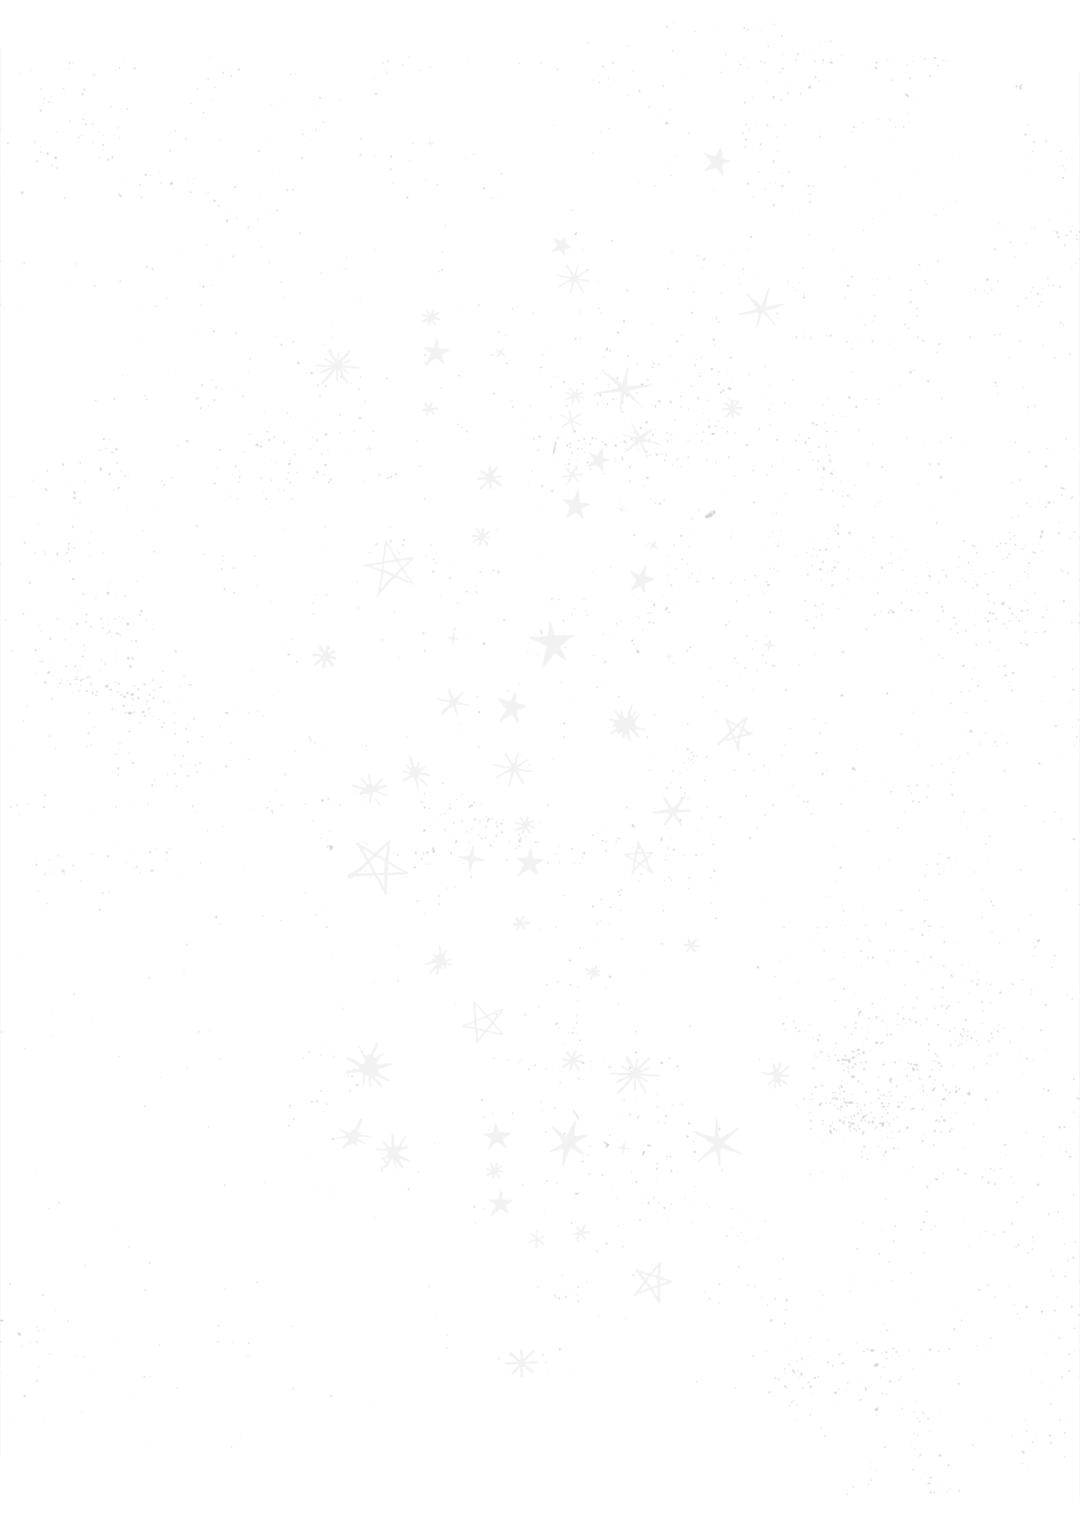 Gray group of stars on a white background.